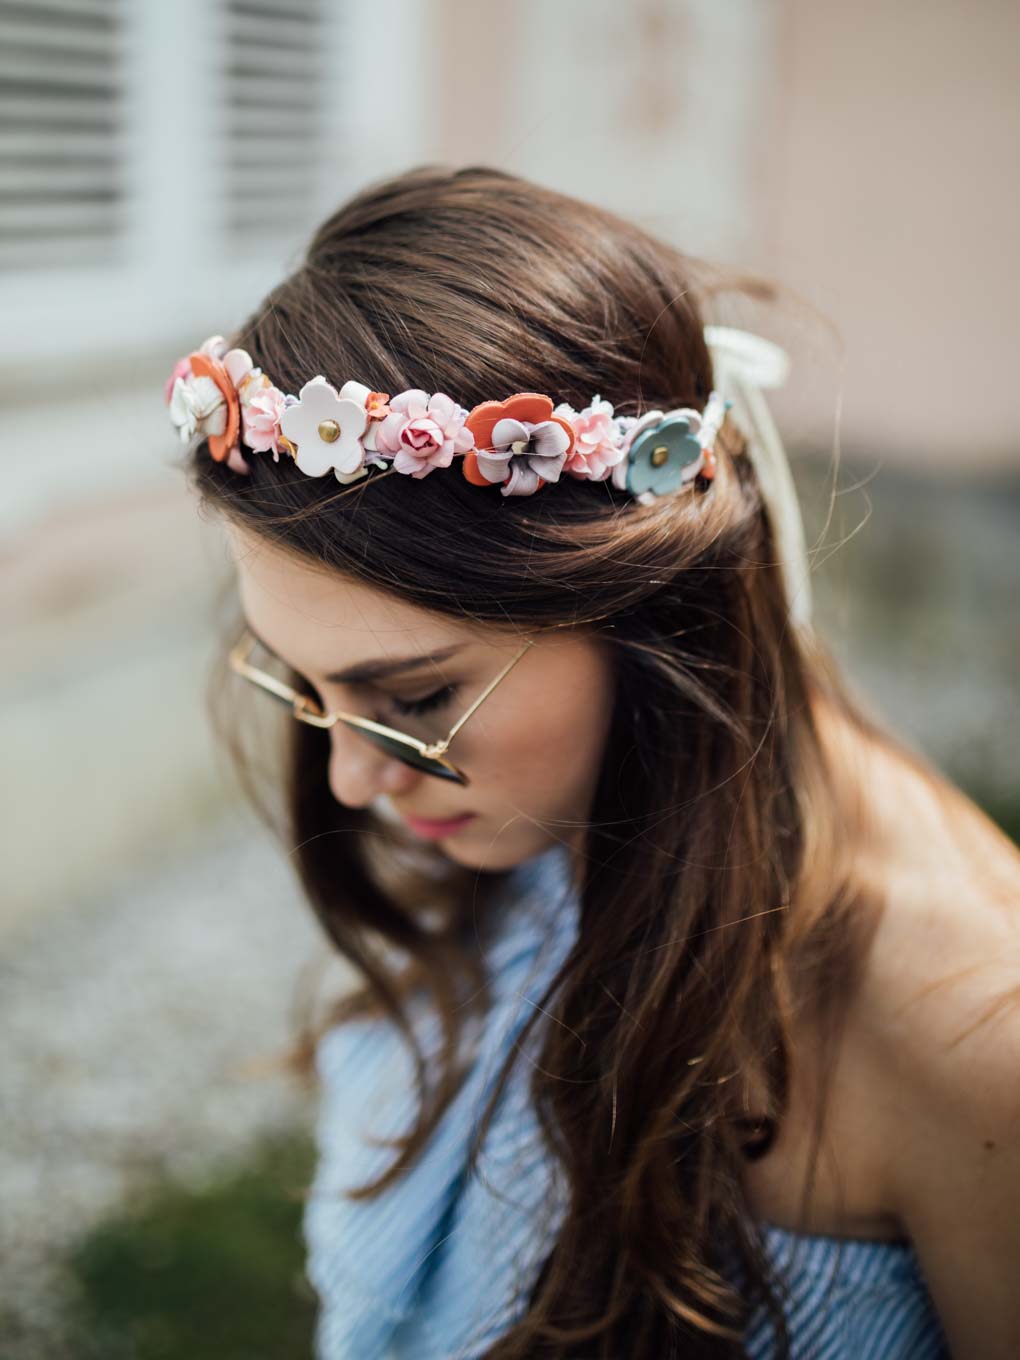 OUTFIT: Mayday - We Are Flowergirls x Marina Hoermanseder | #yourockmylife